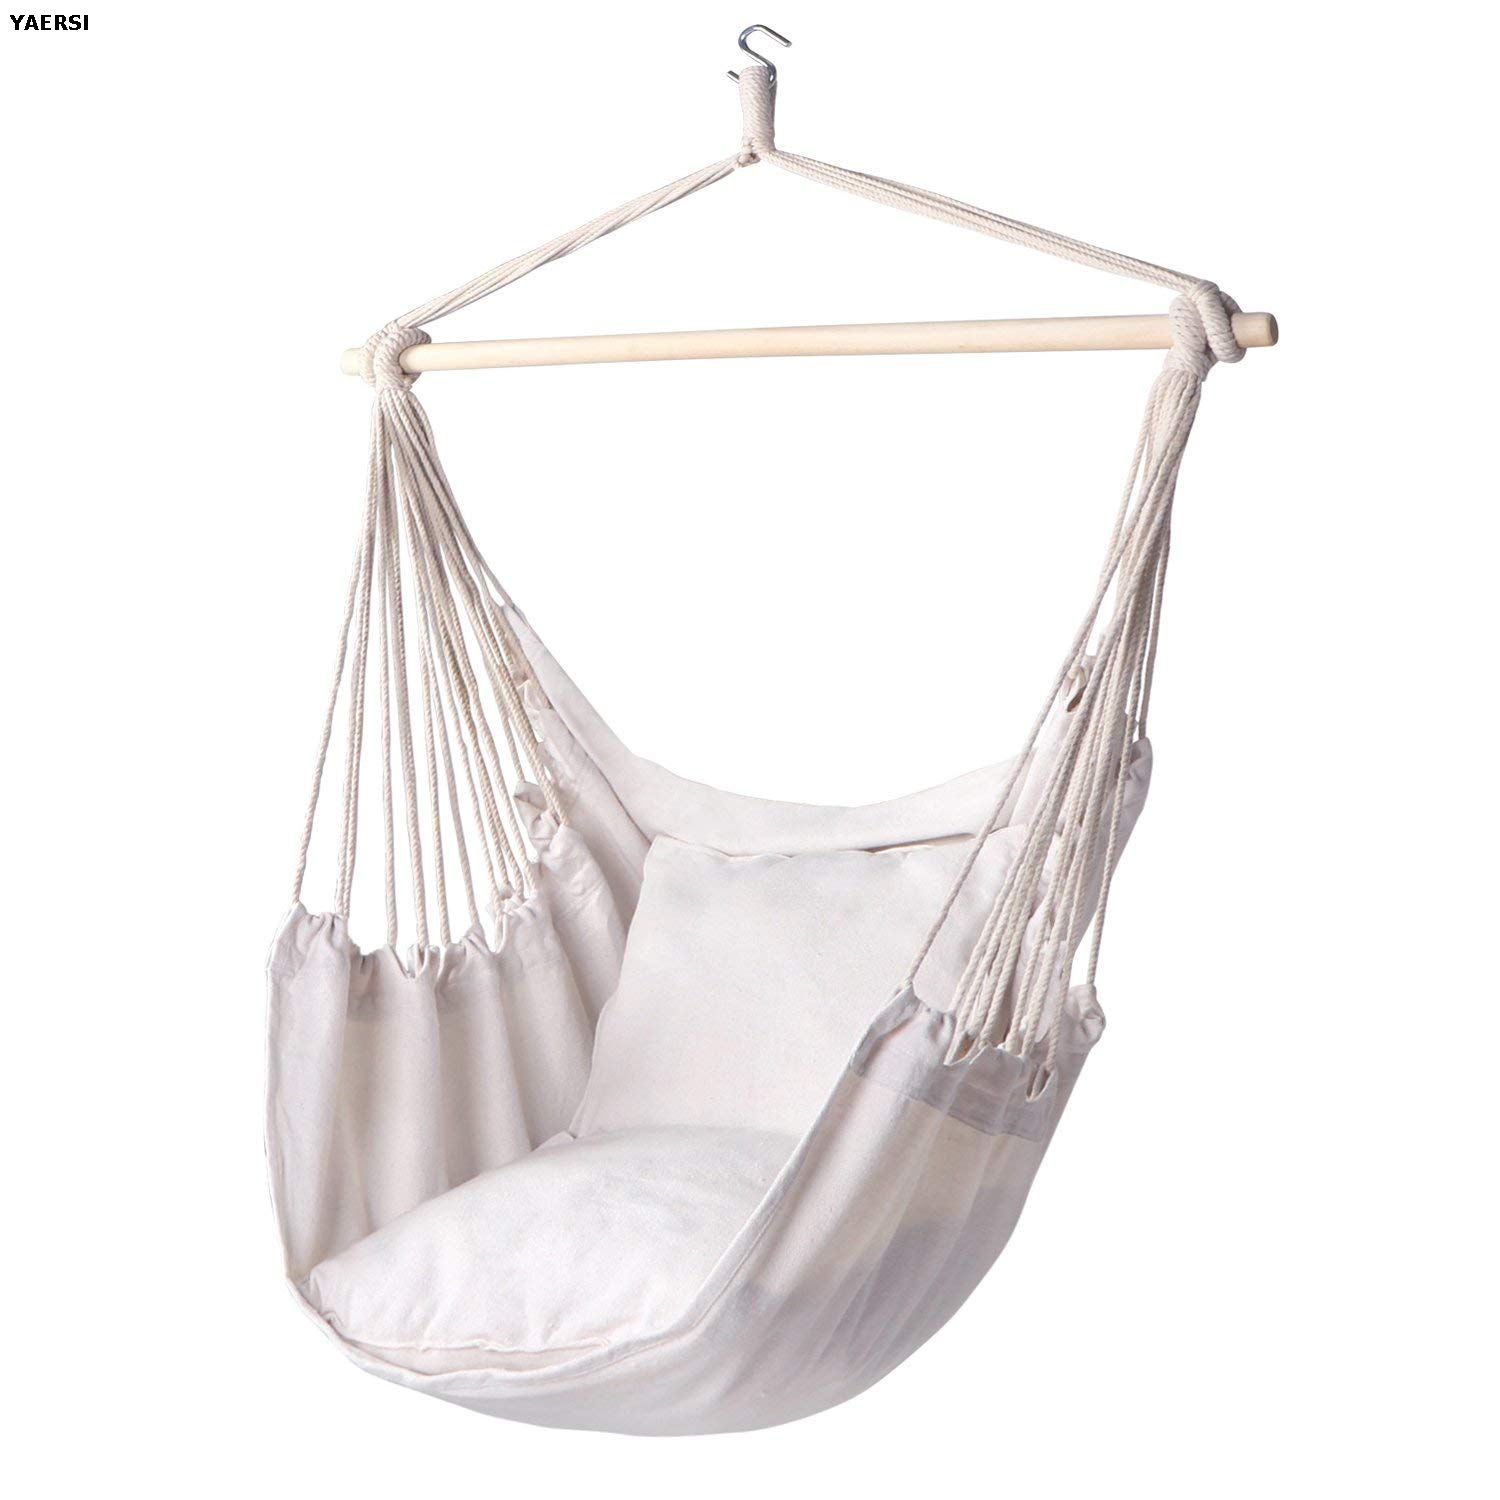 Hanging Hammock Swing with Two Cushions